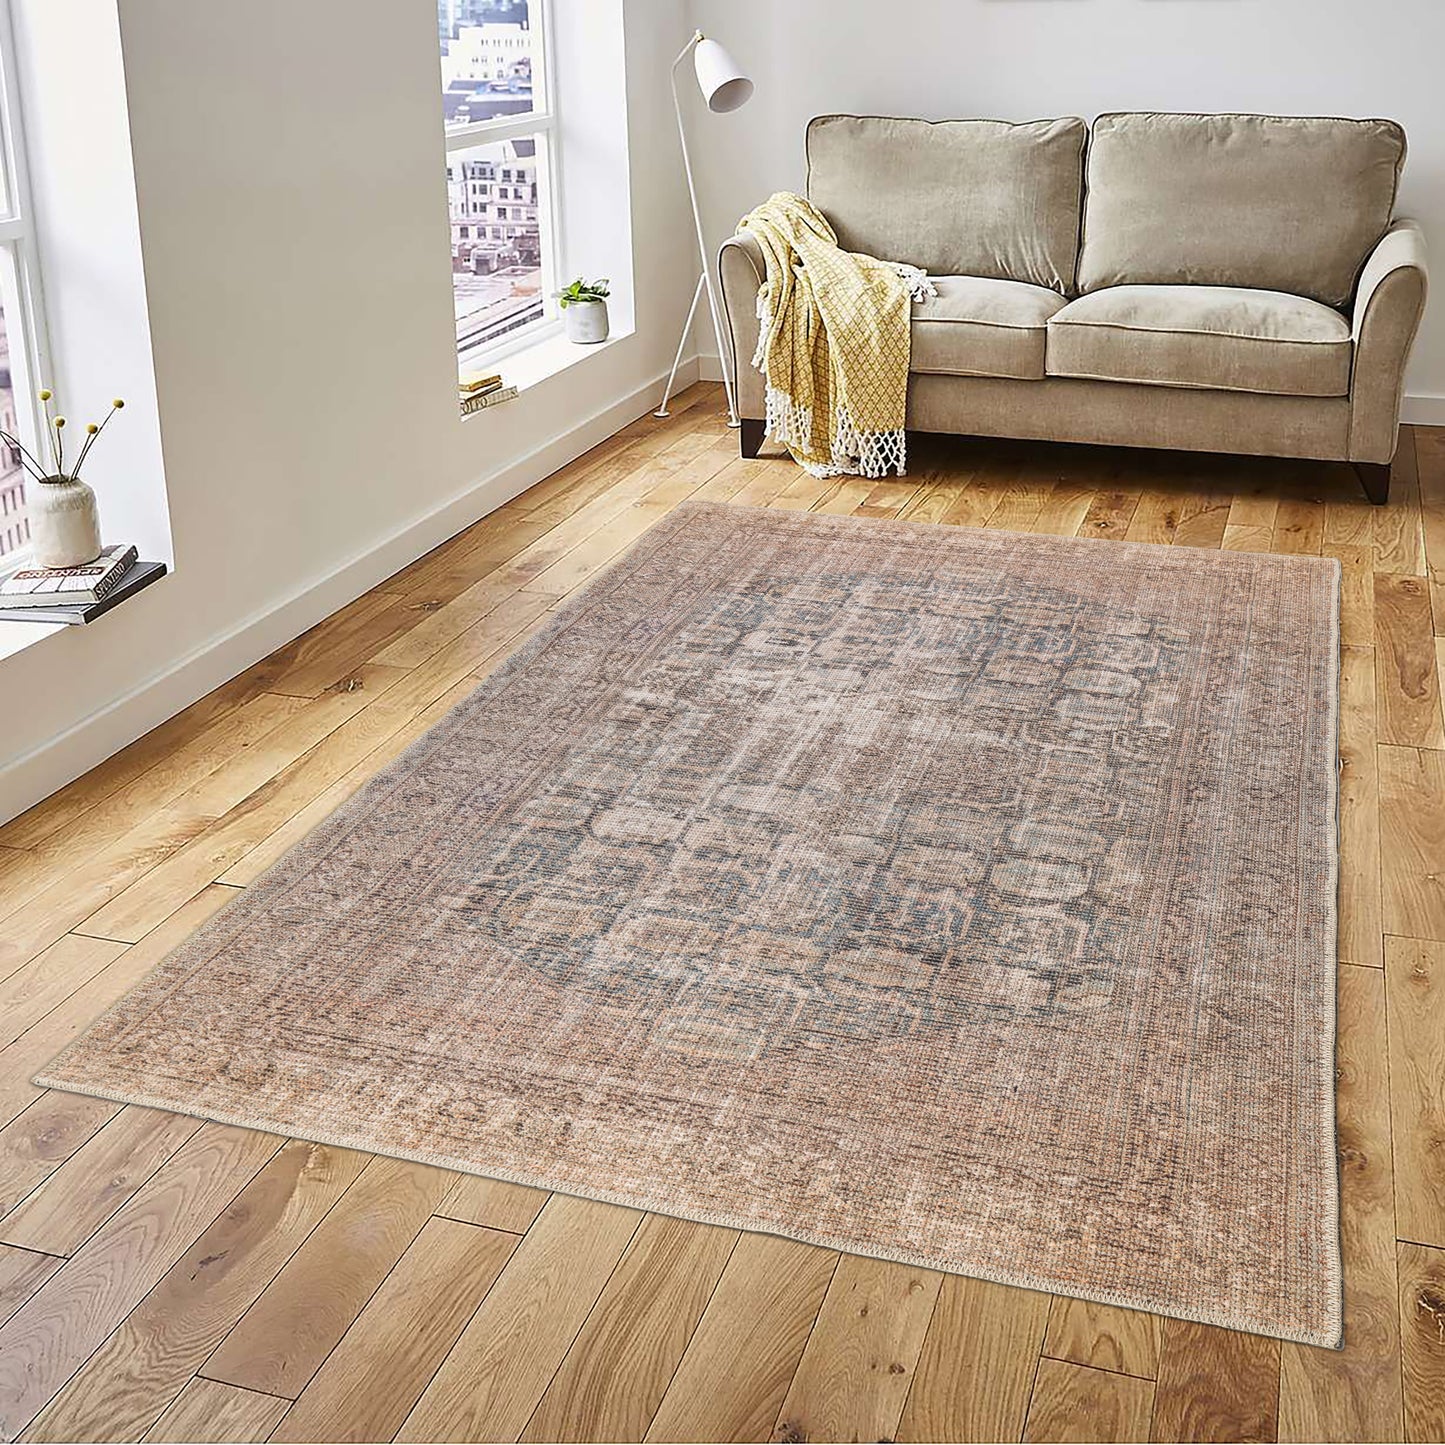 blue cotton and polyster machine washable traditional rustic area rug 6x8, 6x9 ft Living Room, Bedroom, Dining Area, Kitchen Carpet